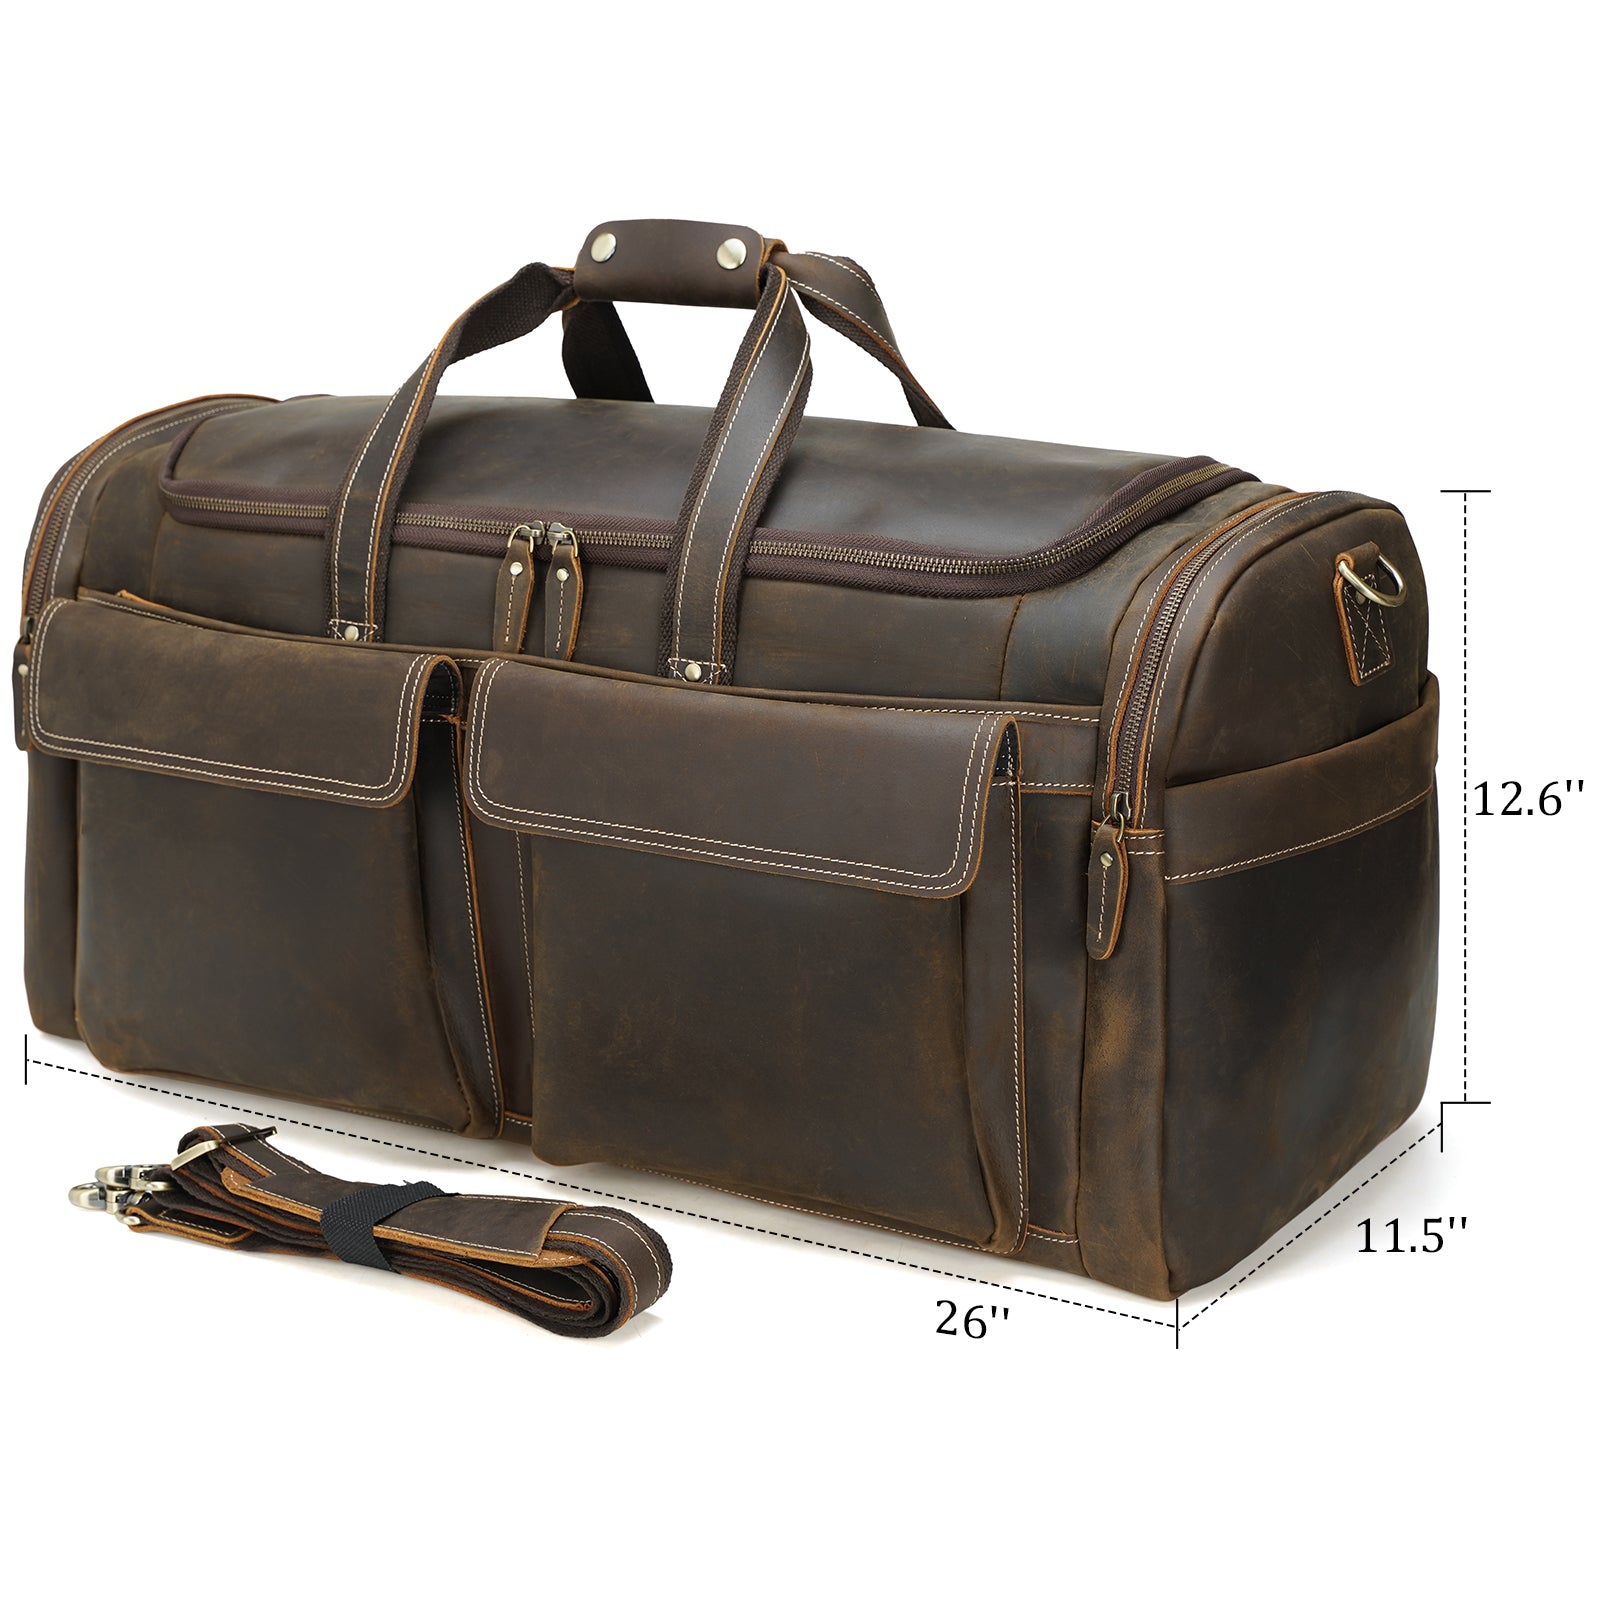 Polare Full Grain Leather Large Duffle Weekender Overnight Travel Bag (26"Dimension)